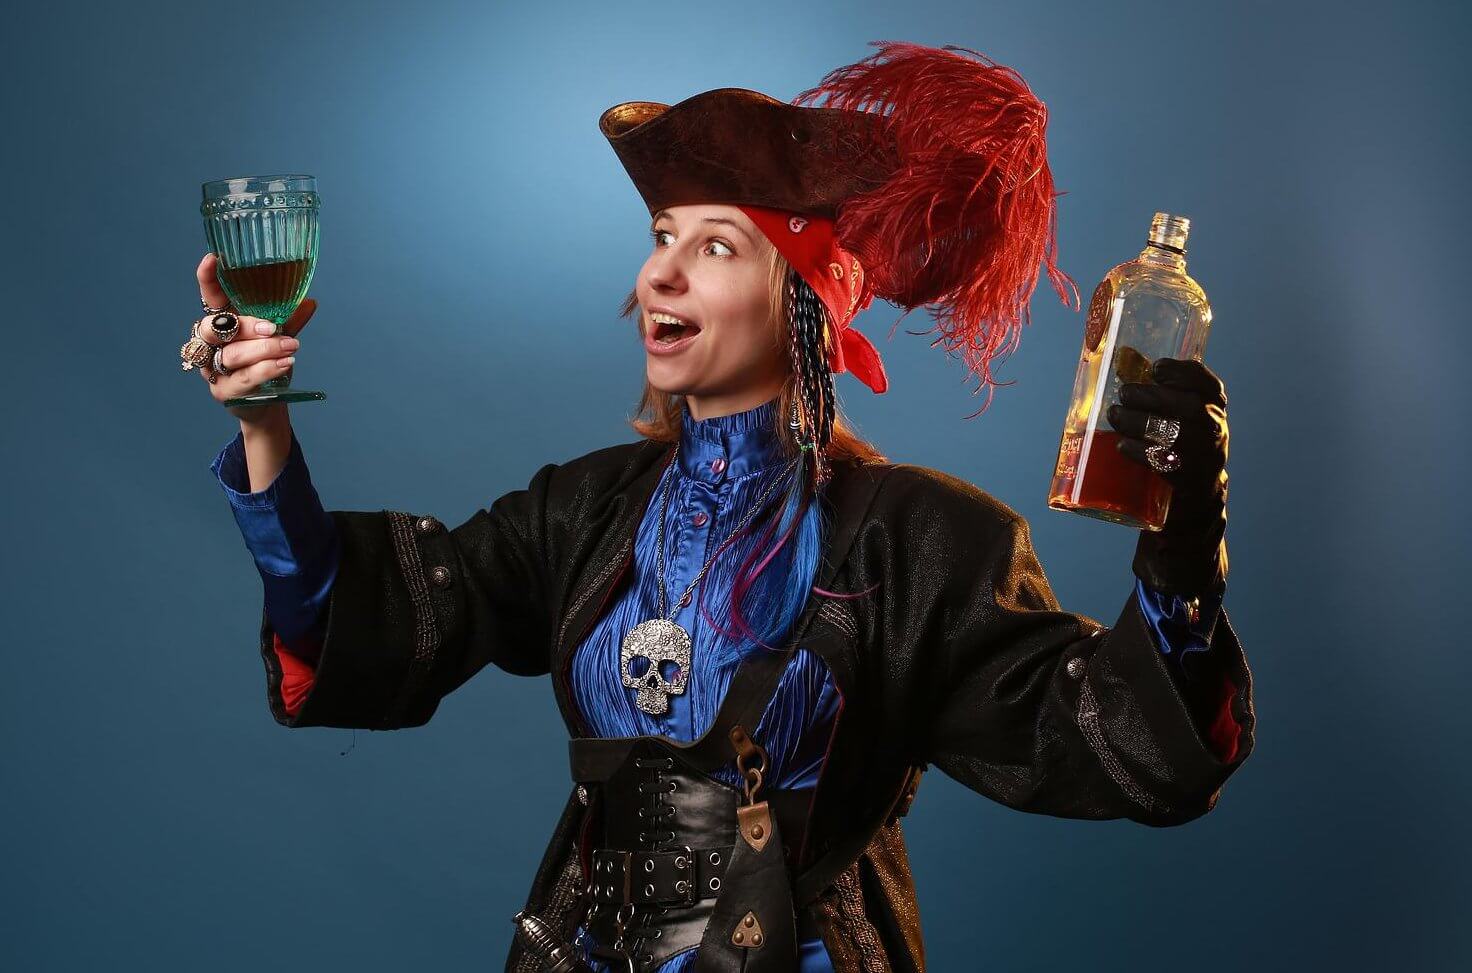 Pirates of the Caribbean Slang and Grog in 1666